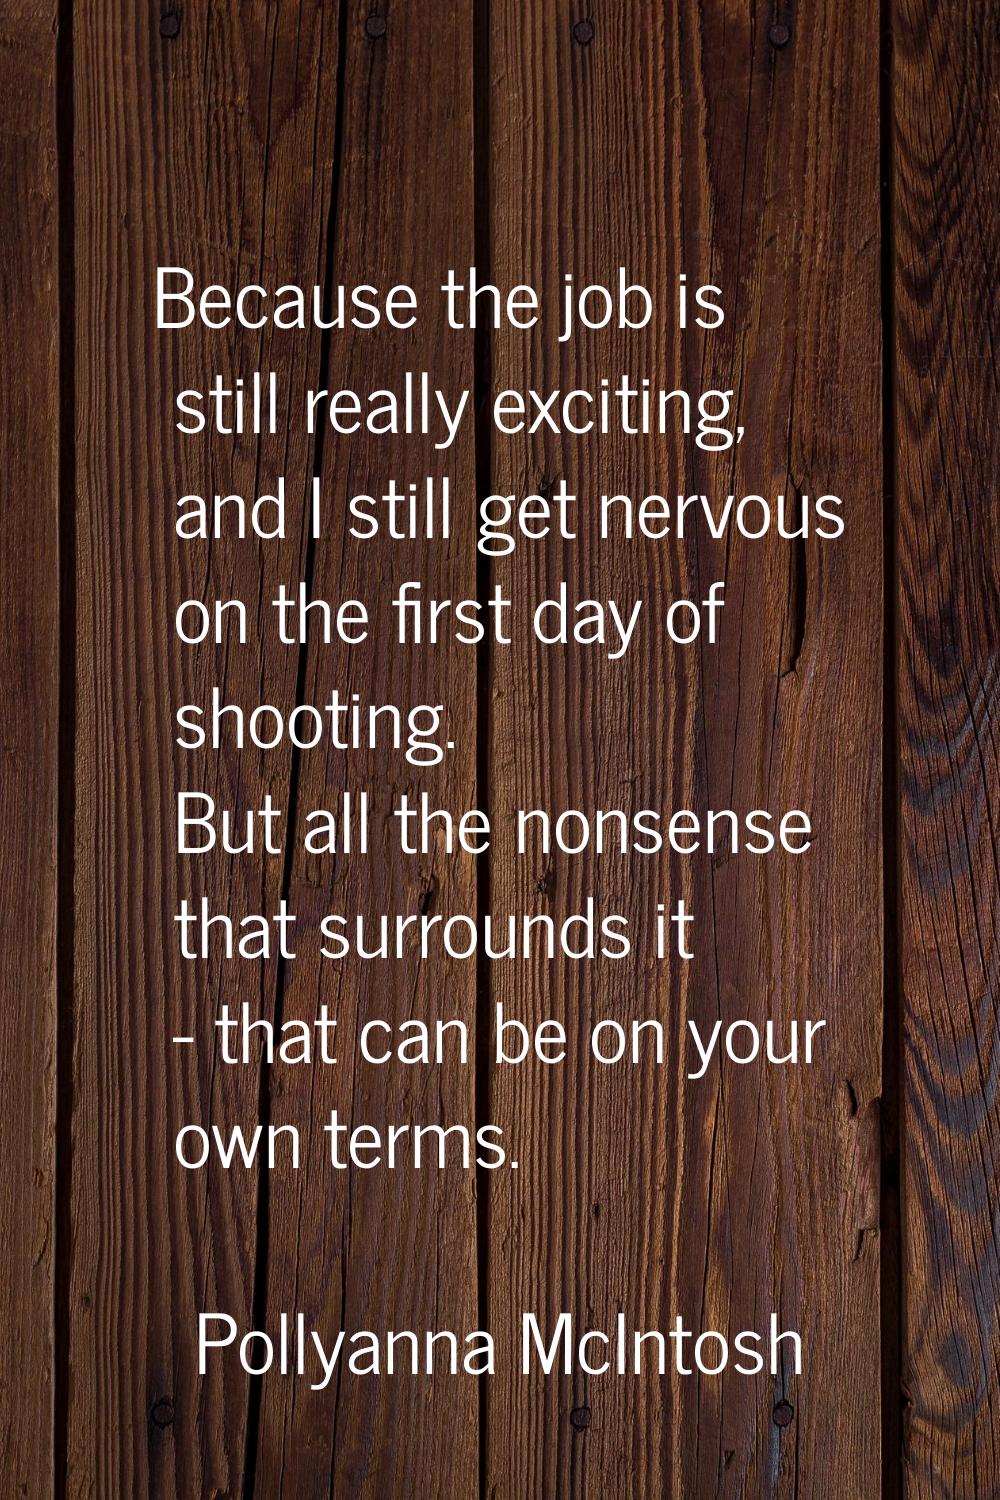 Because the job is still really exciting, and I still get nervous on the first day of shooting. But